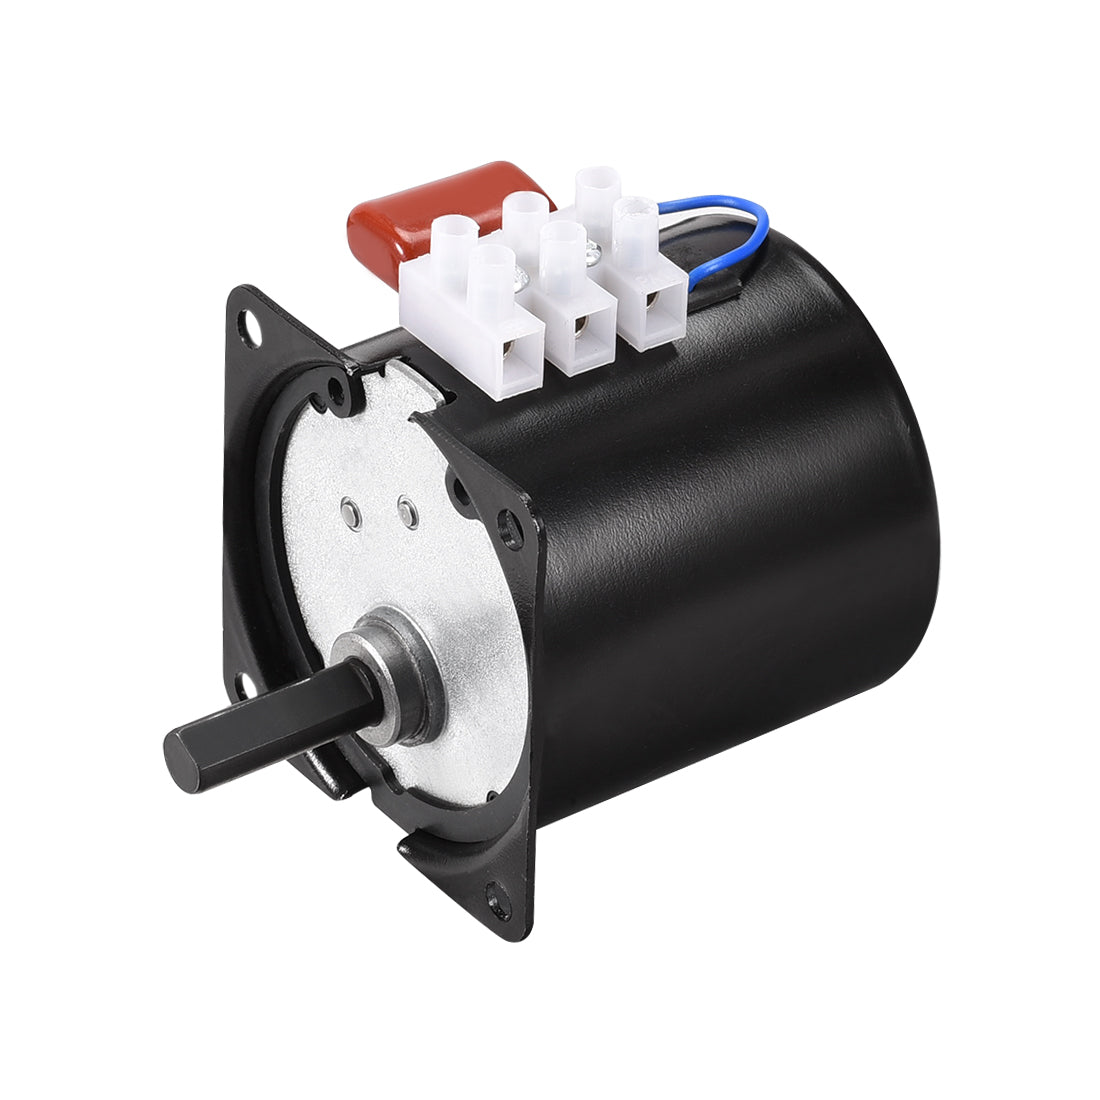 uxcell Uxcell AC 220V Electric Synchronous Motor Metal Gear Turntable /C 5RPM 50-60HZ 14W 8mm Dia Eccentric Shaft